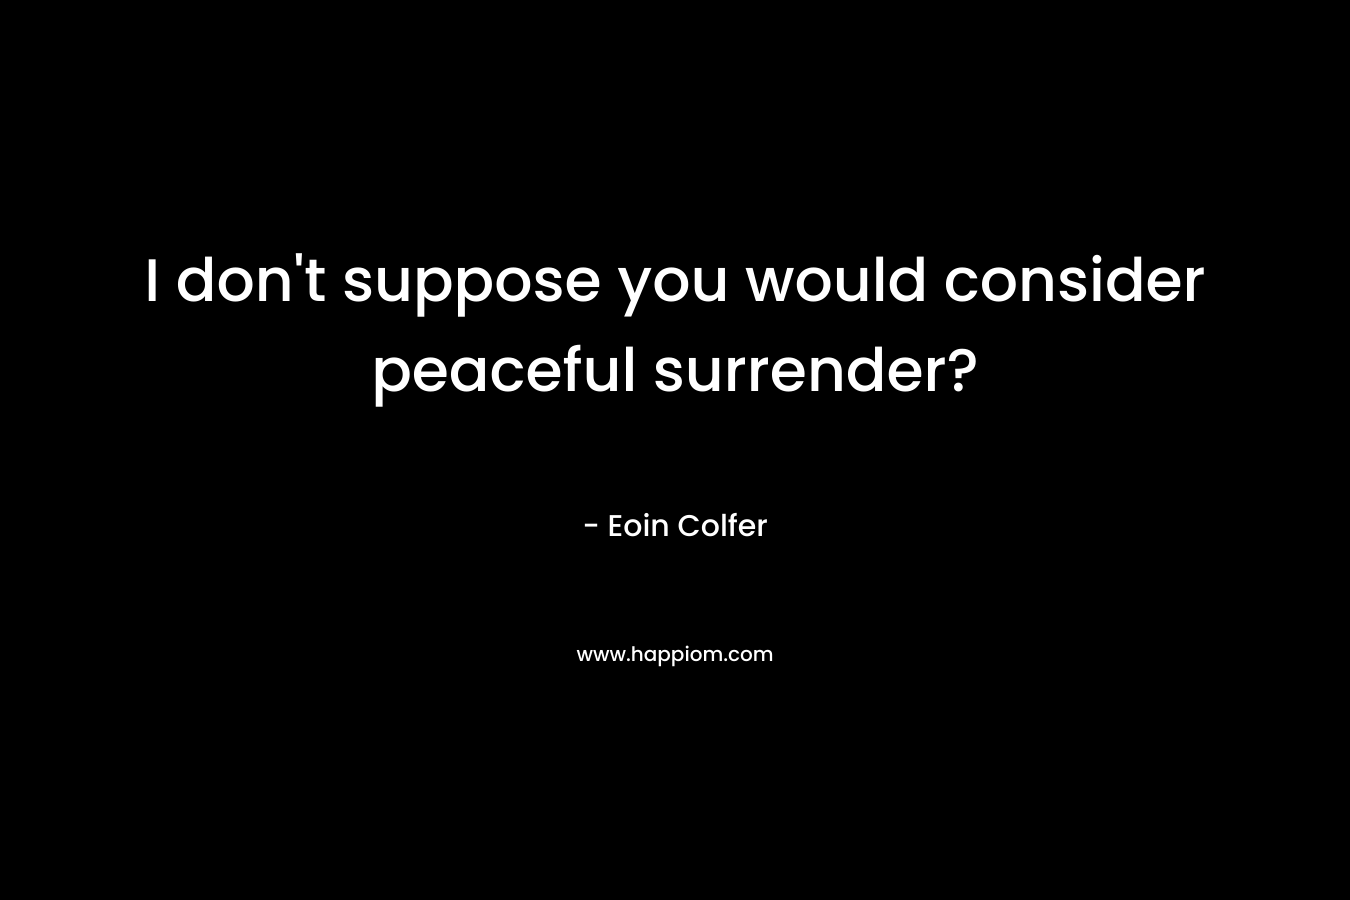 I don't suppose you would consider peaceful surrender?